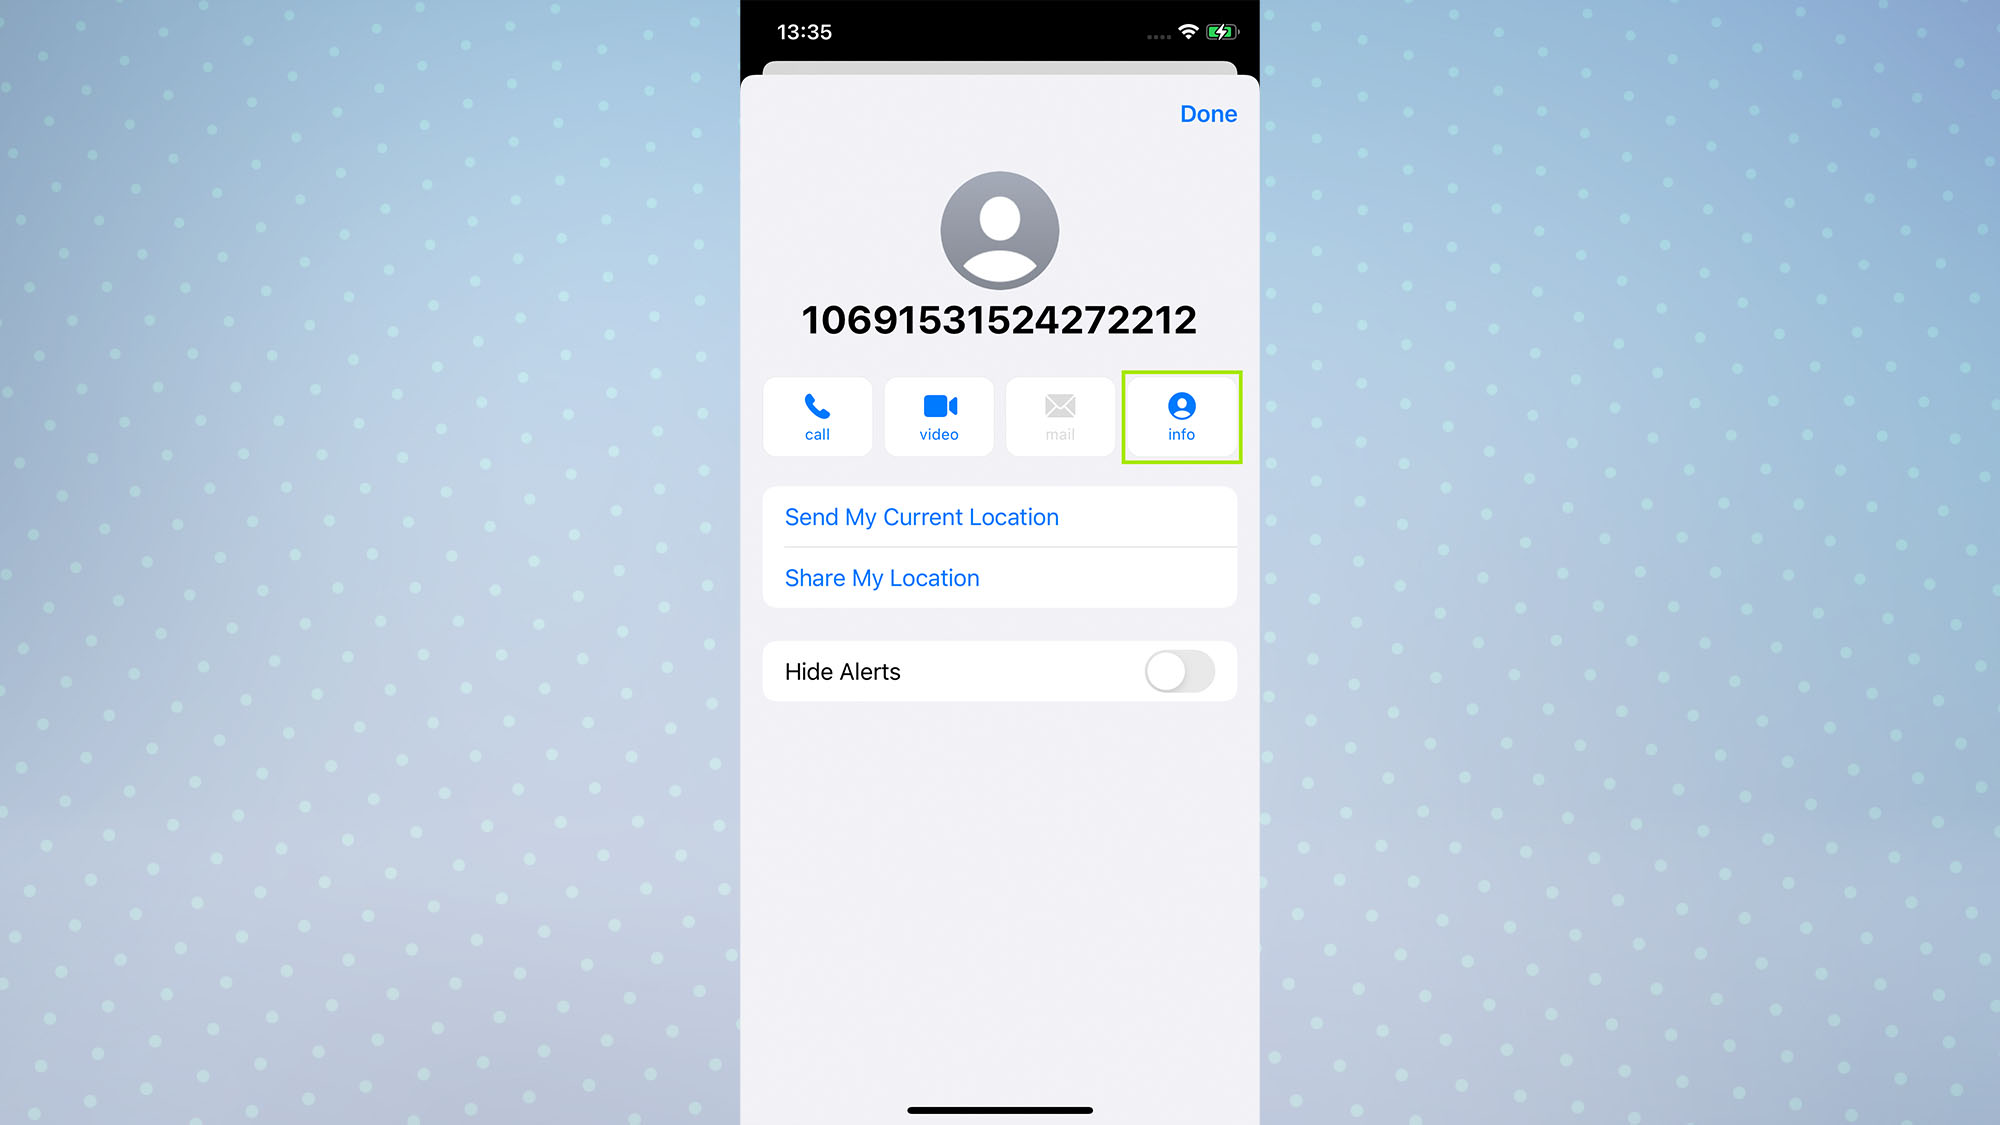 A screenshot of an iPhone screen showing the Messages app with a contact card open and the info button highlighted.